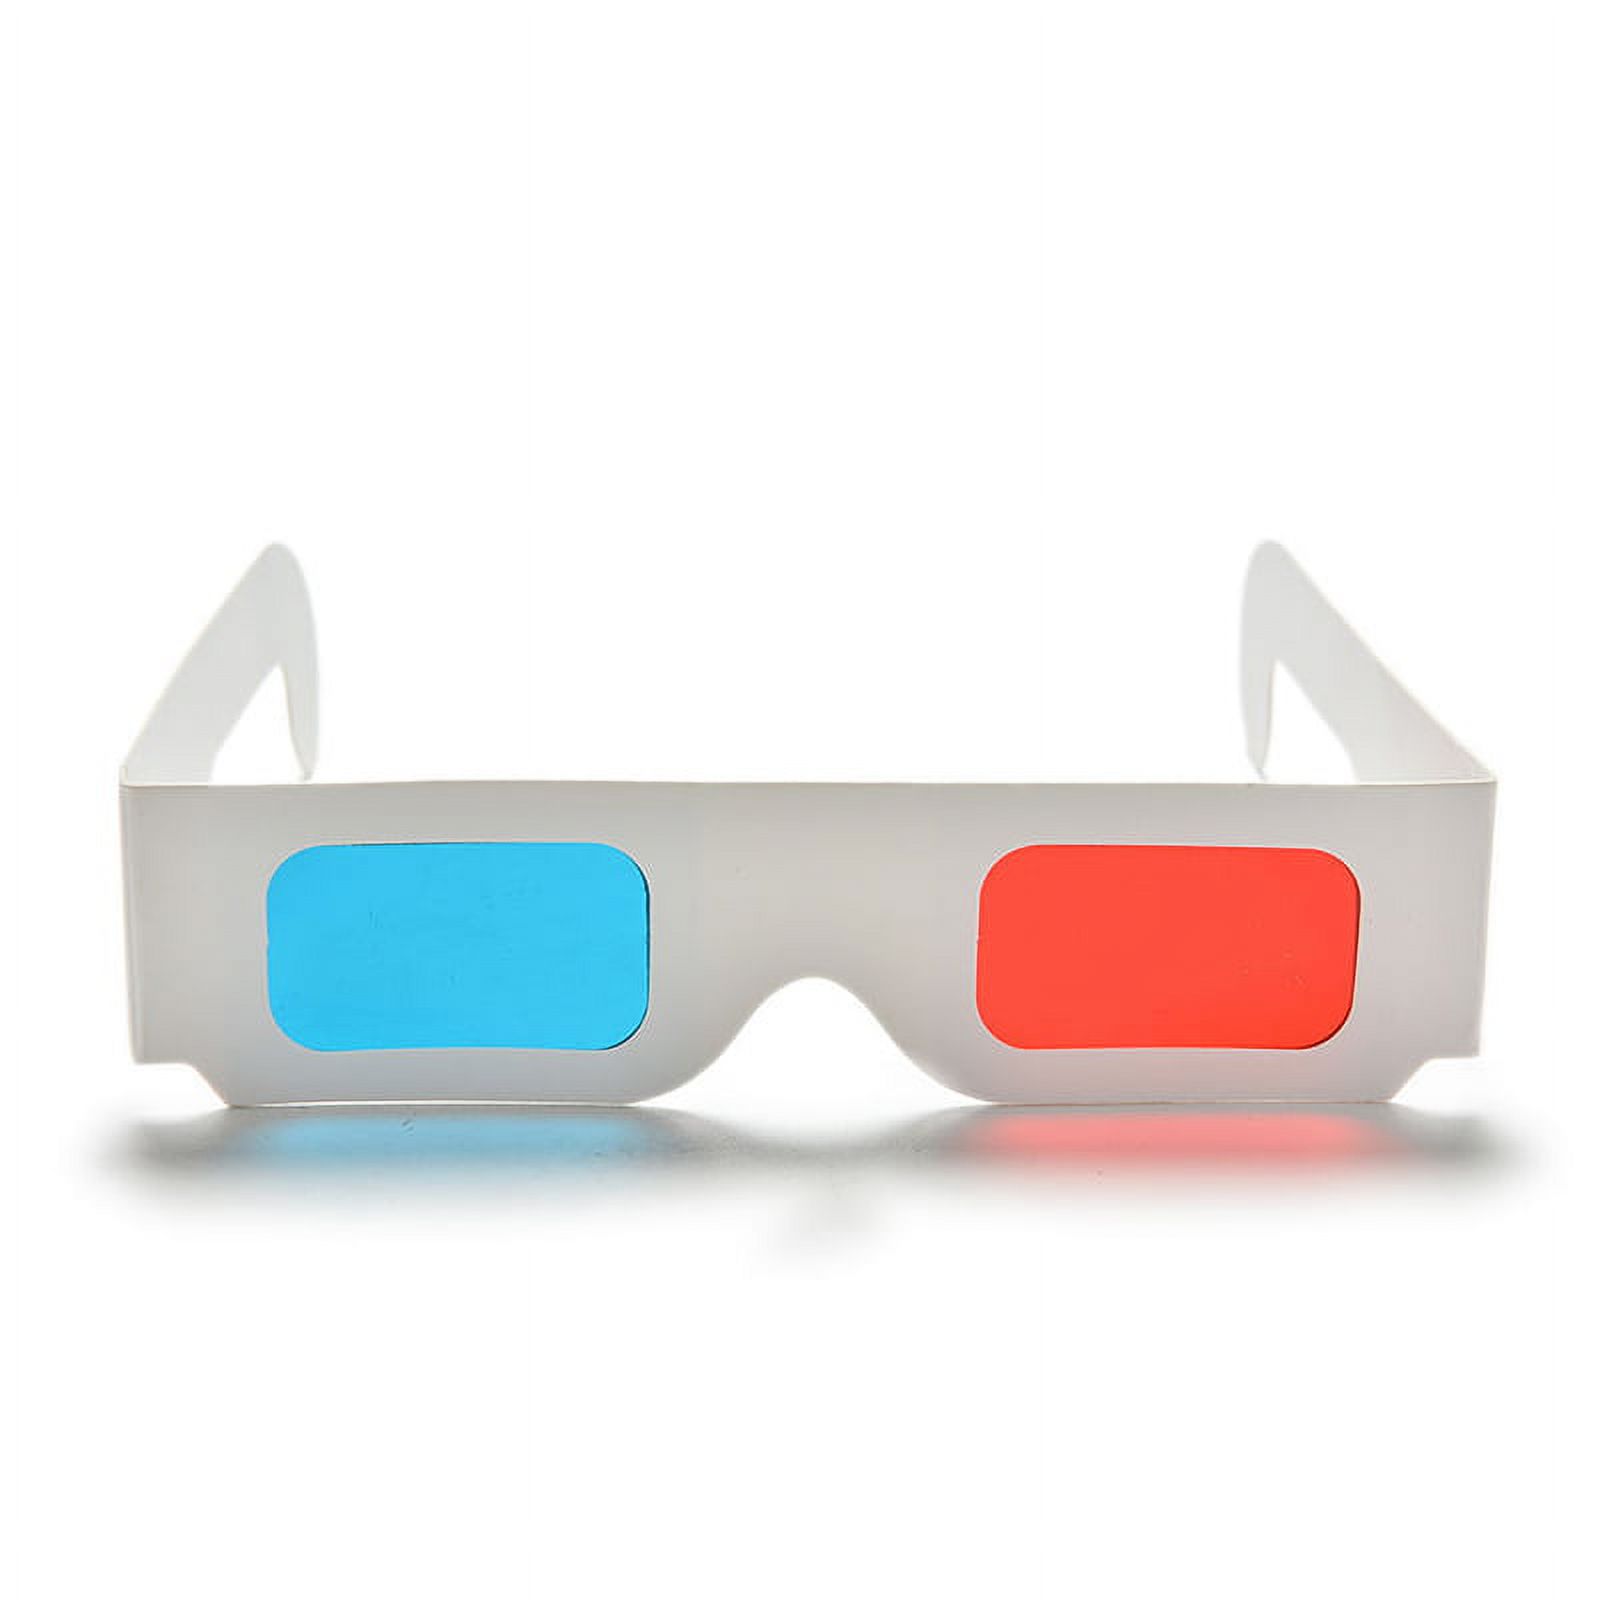 Universal Anaglyph Cardboard Paper Red Blue Cyan 3d Glasses Movie Glasses NEW - image 5 of 7